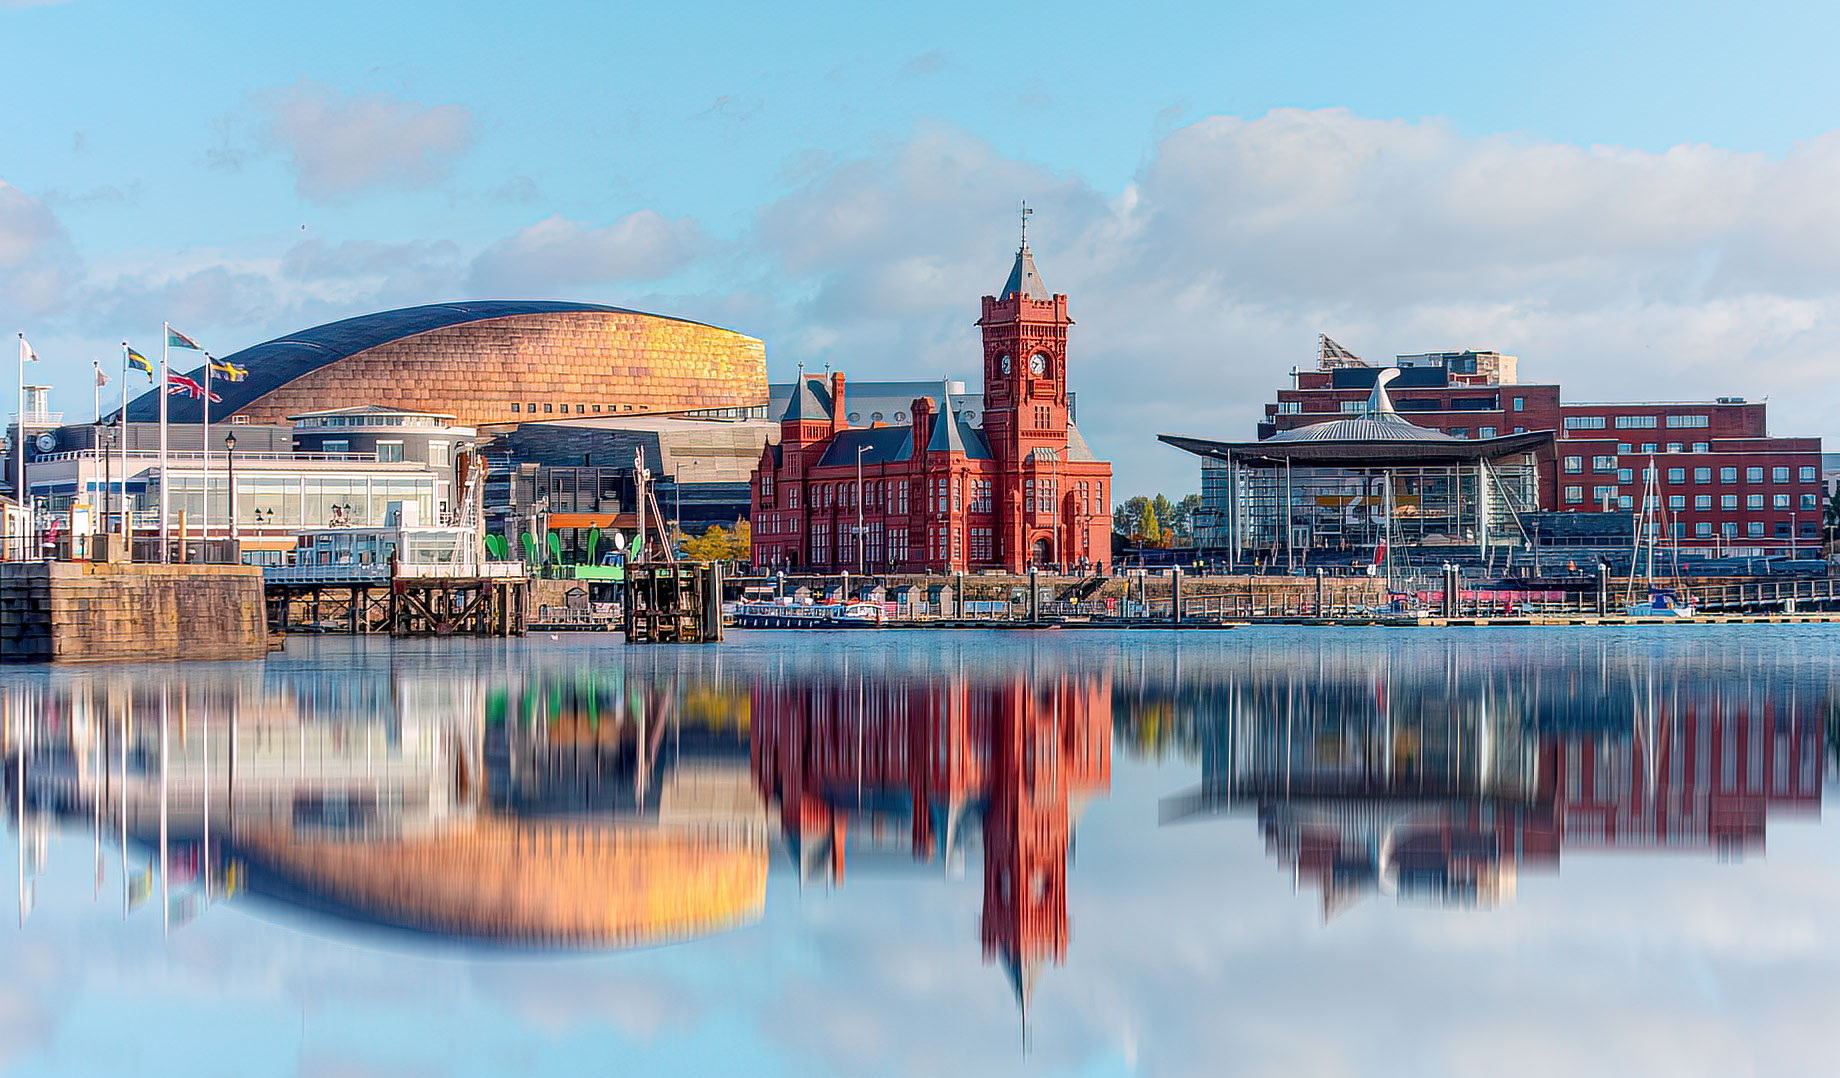 Panoramic View of Cardiff Bay - Cardiff, Wales